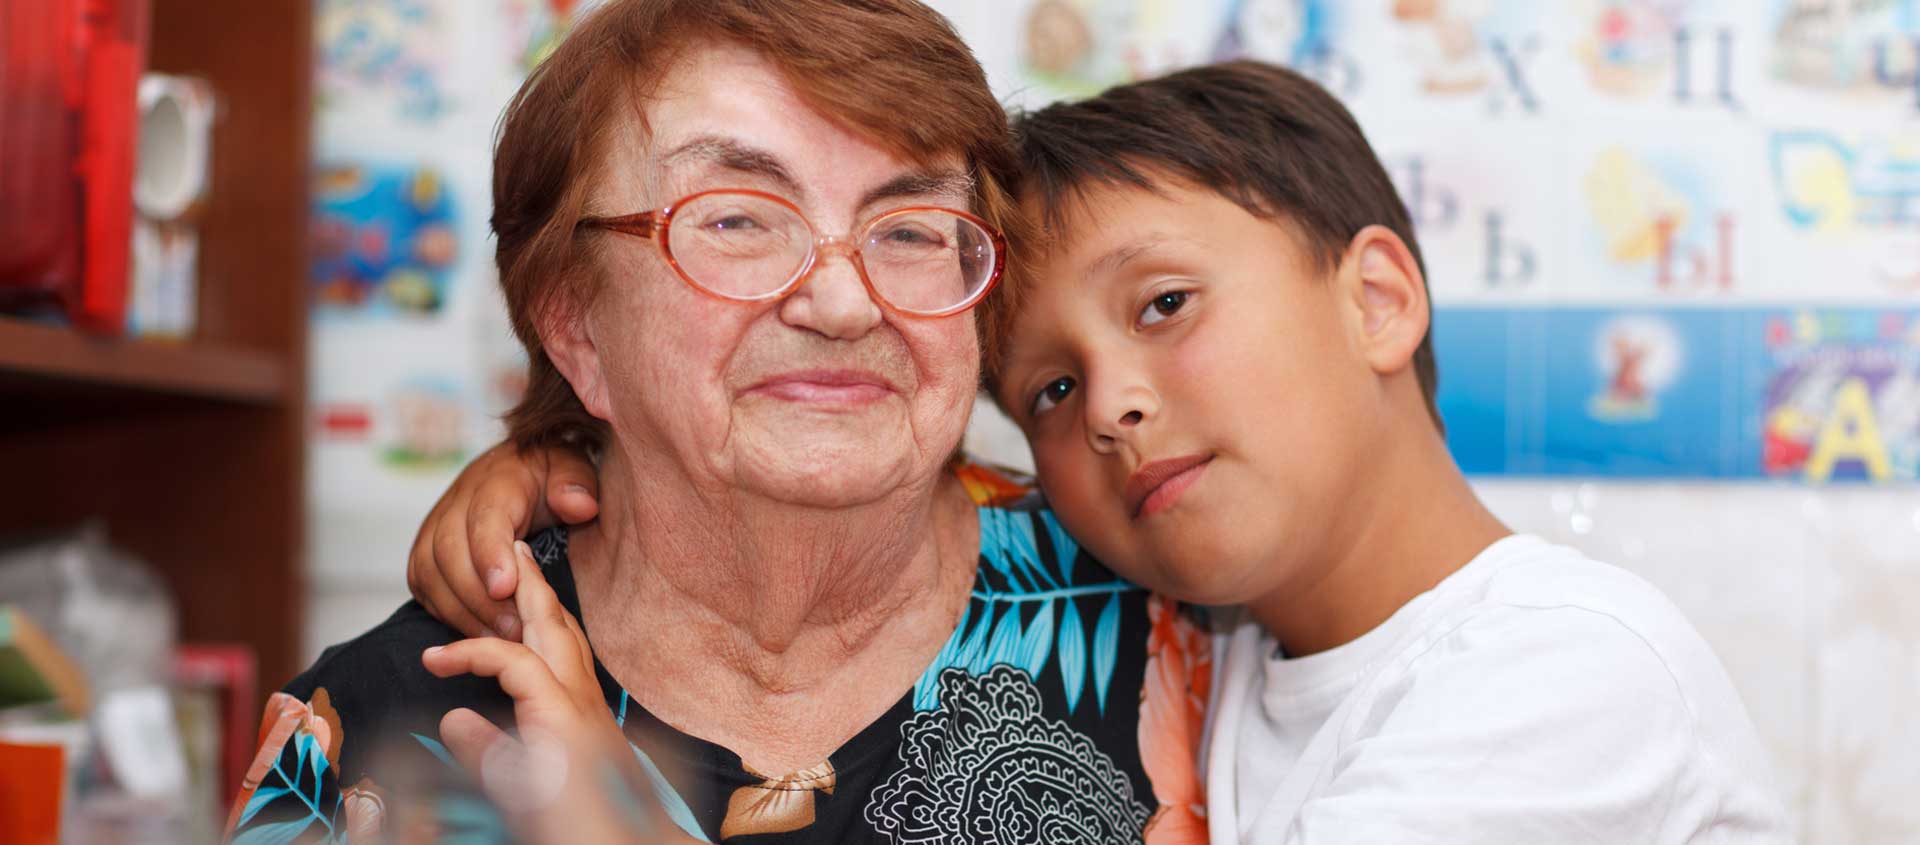 A pre-teen boy and his grandmother face the camera in a half embrace.